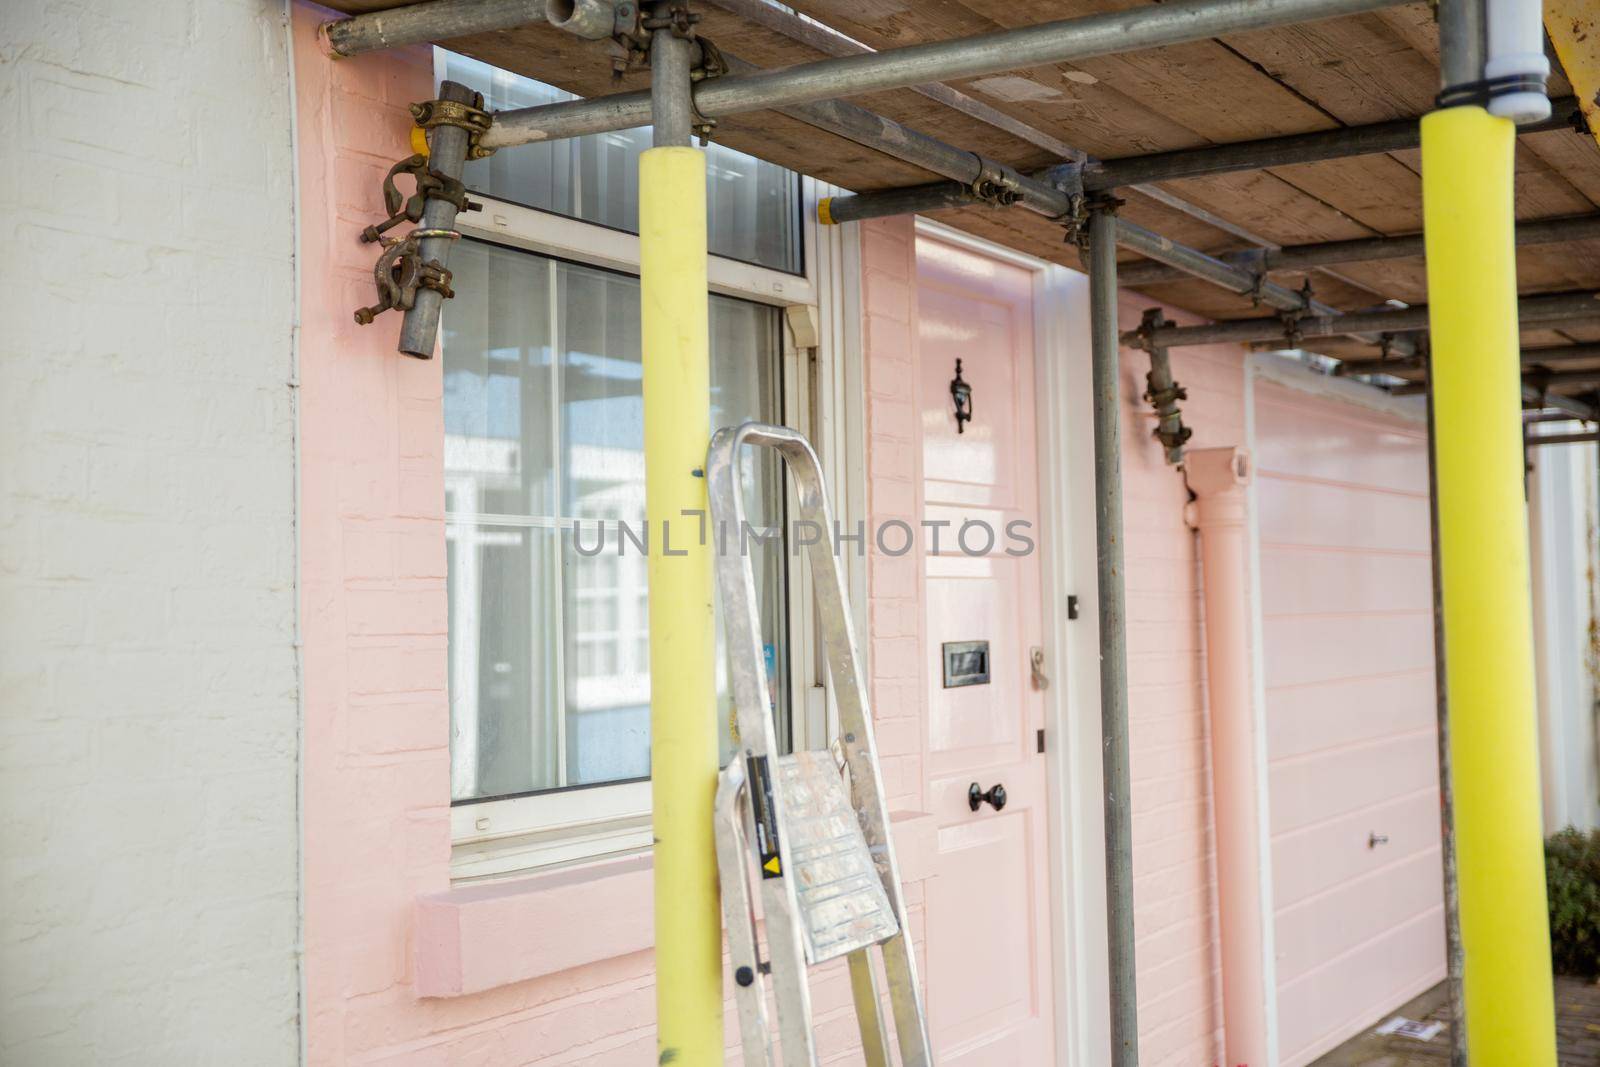 Scaffold outside window and door of pastel pink British house. Beautiful colorful English house behind metal structure. Colorful London neighborhood